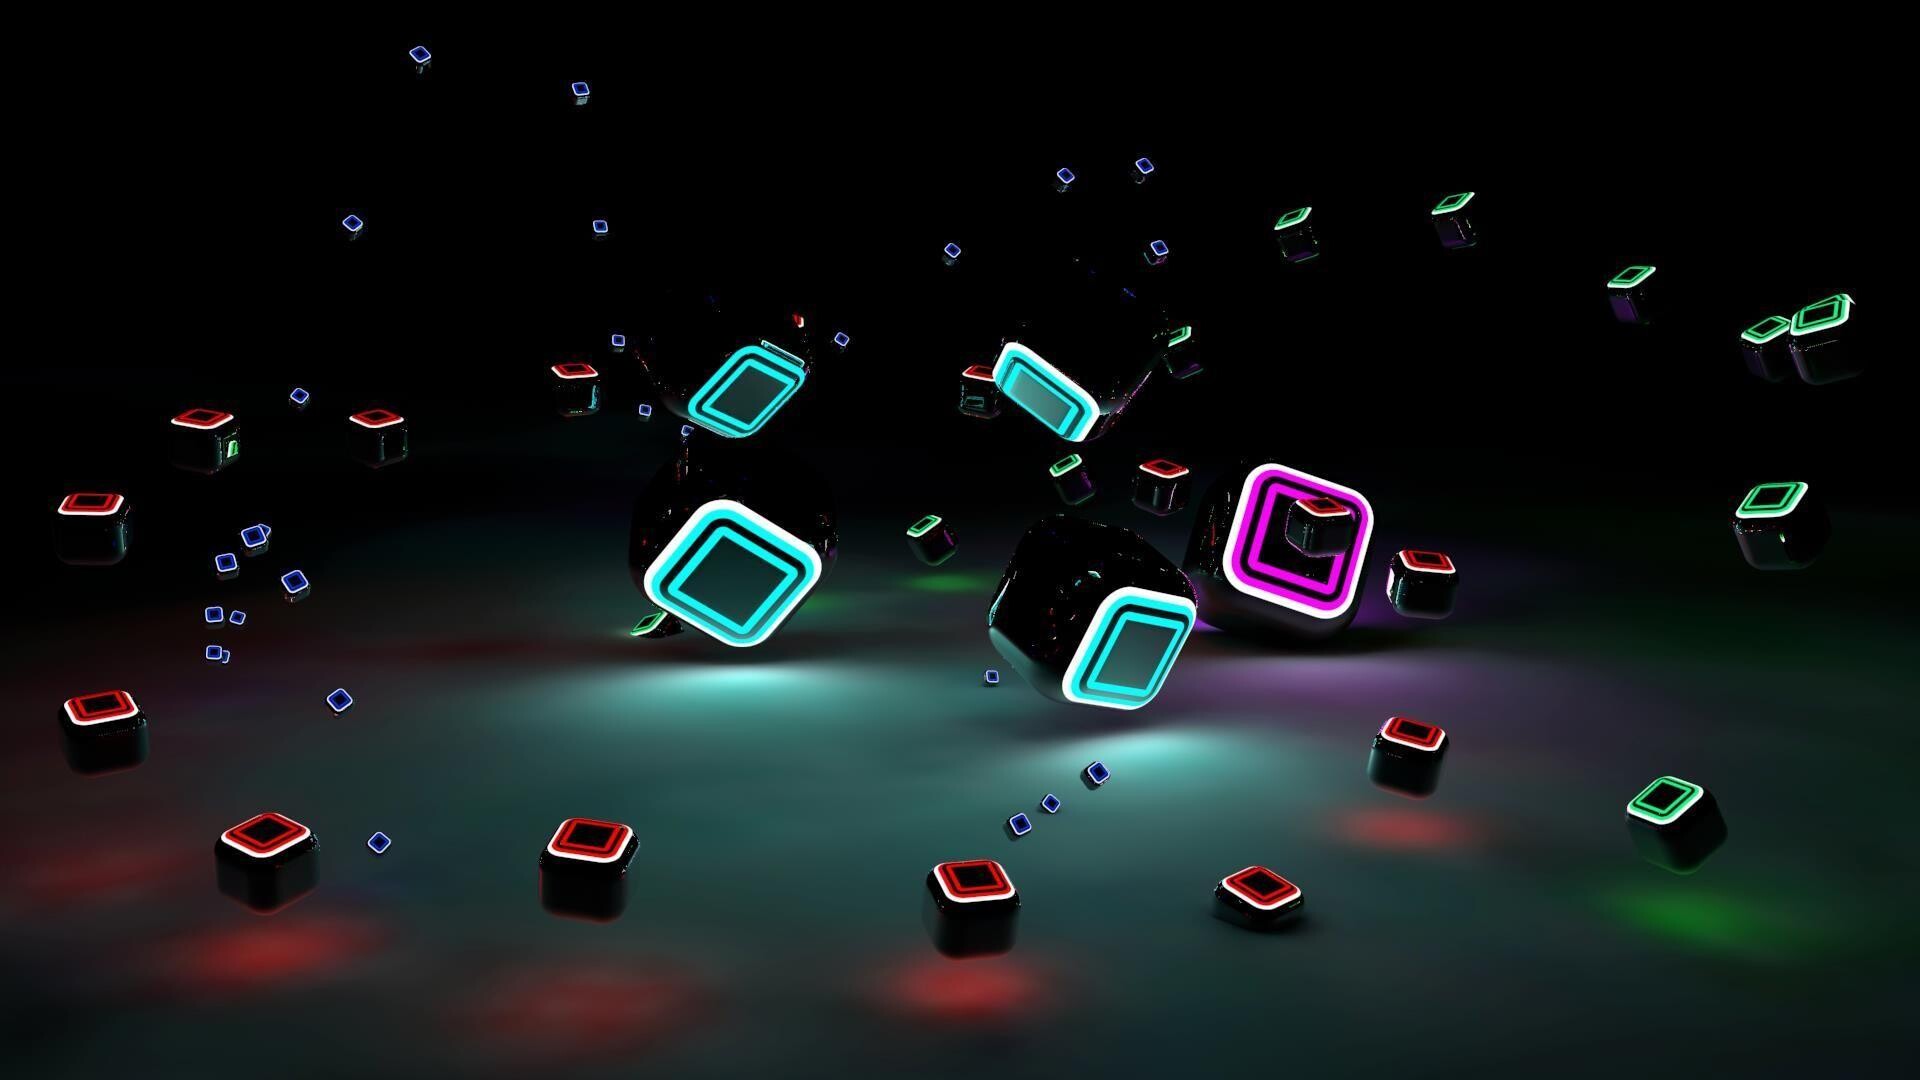 Glow in the Dark: Neon rectangles, Abstract, 3D art. 1920x1080 Full HD Background.